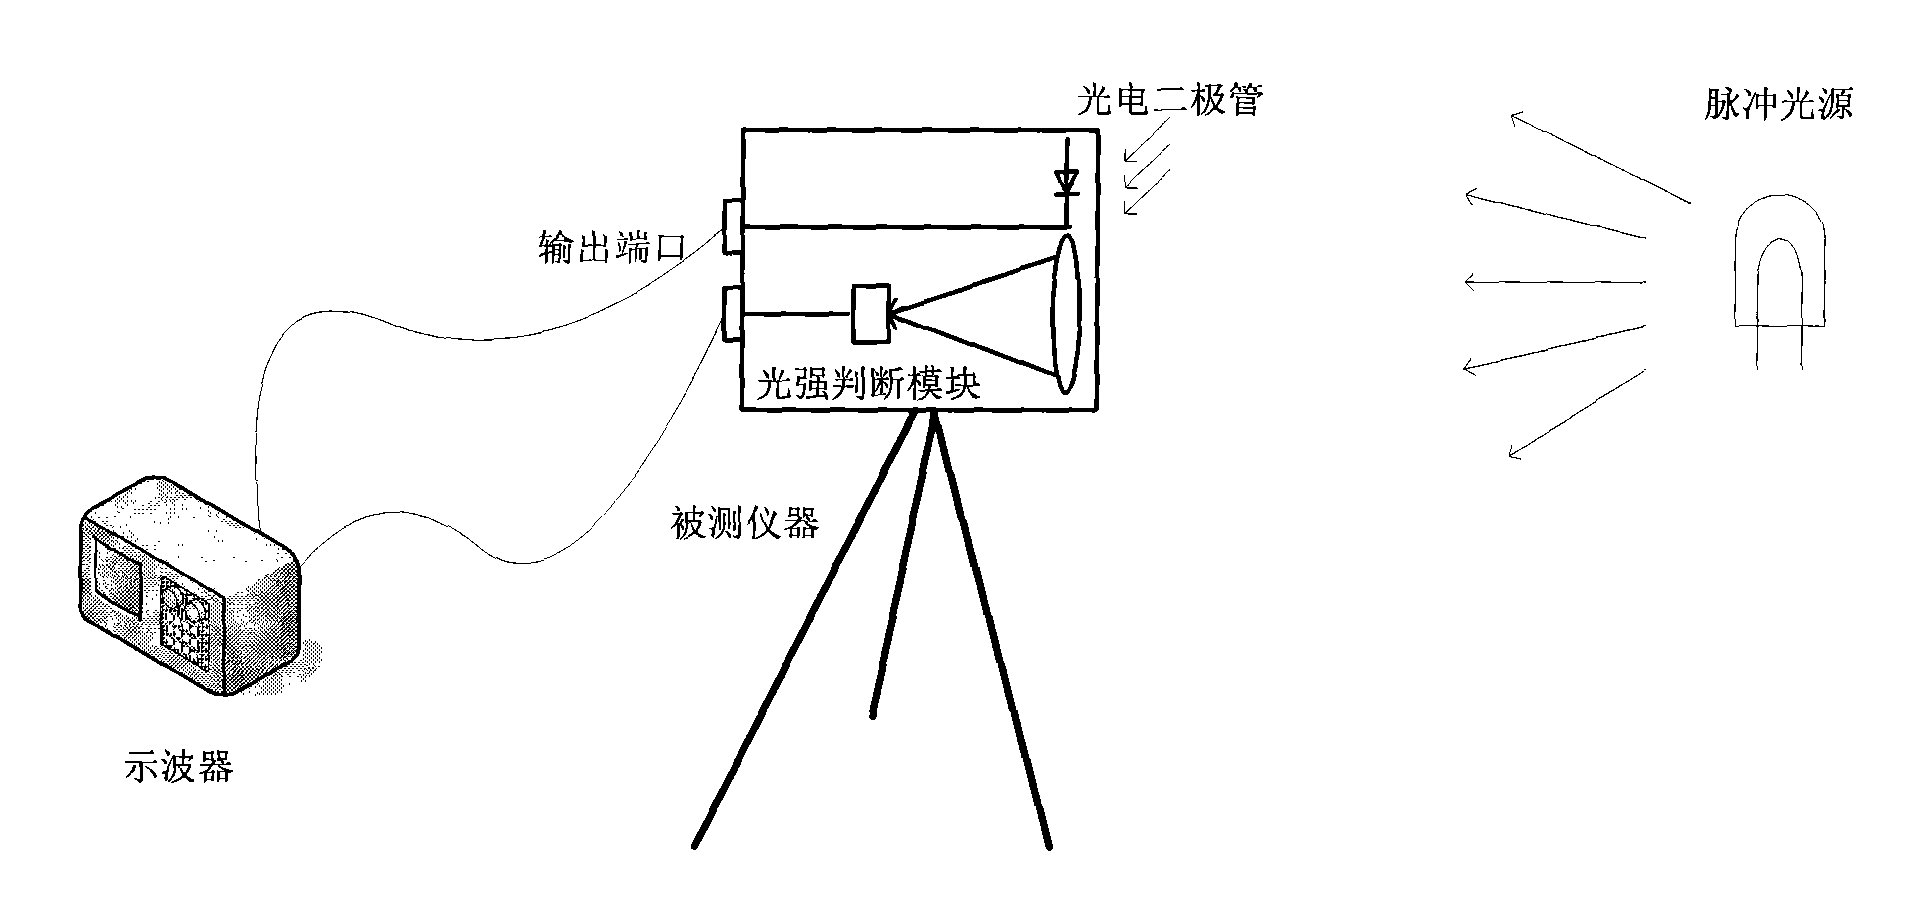 Method for measuring response time of photoelectric measurement instrument